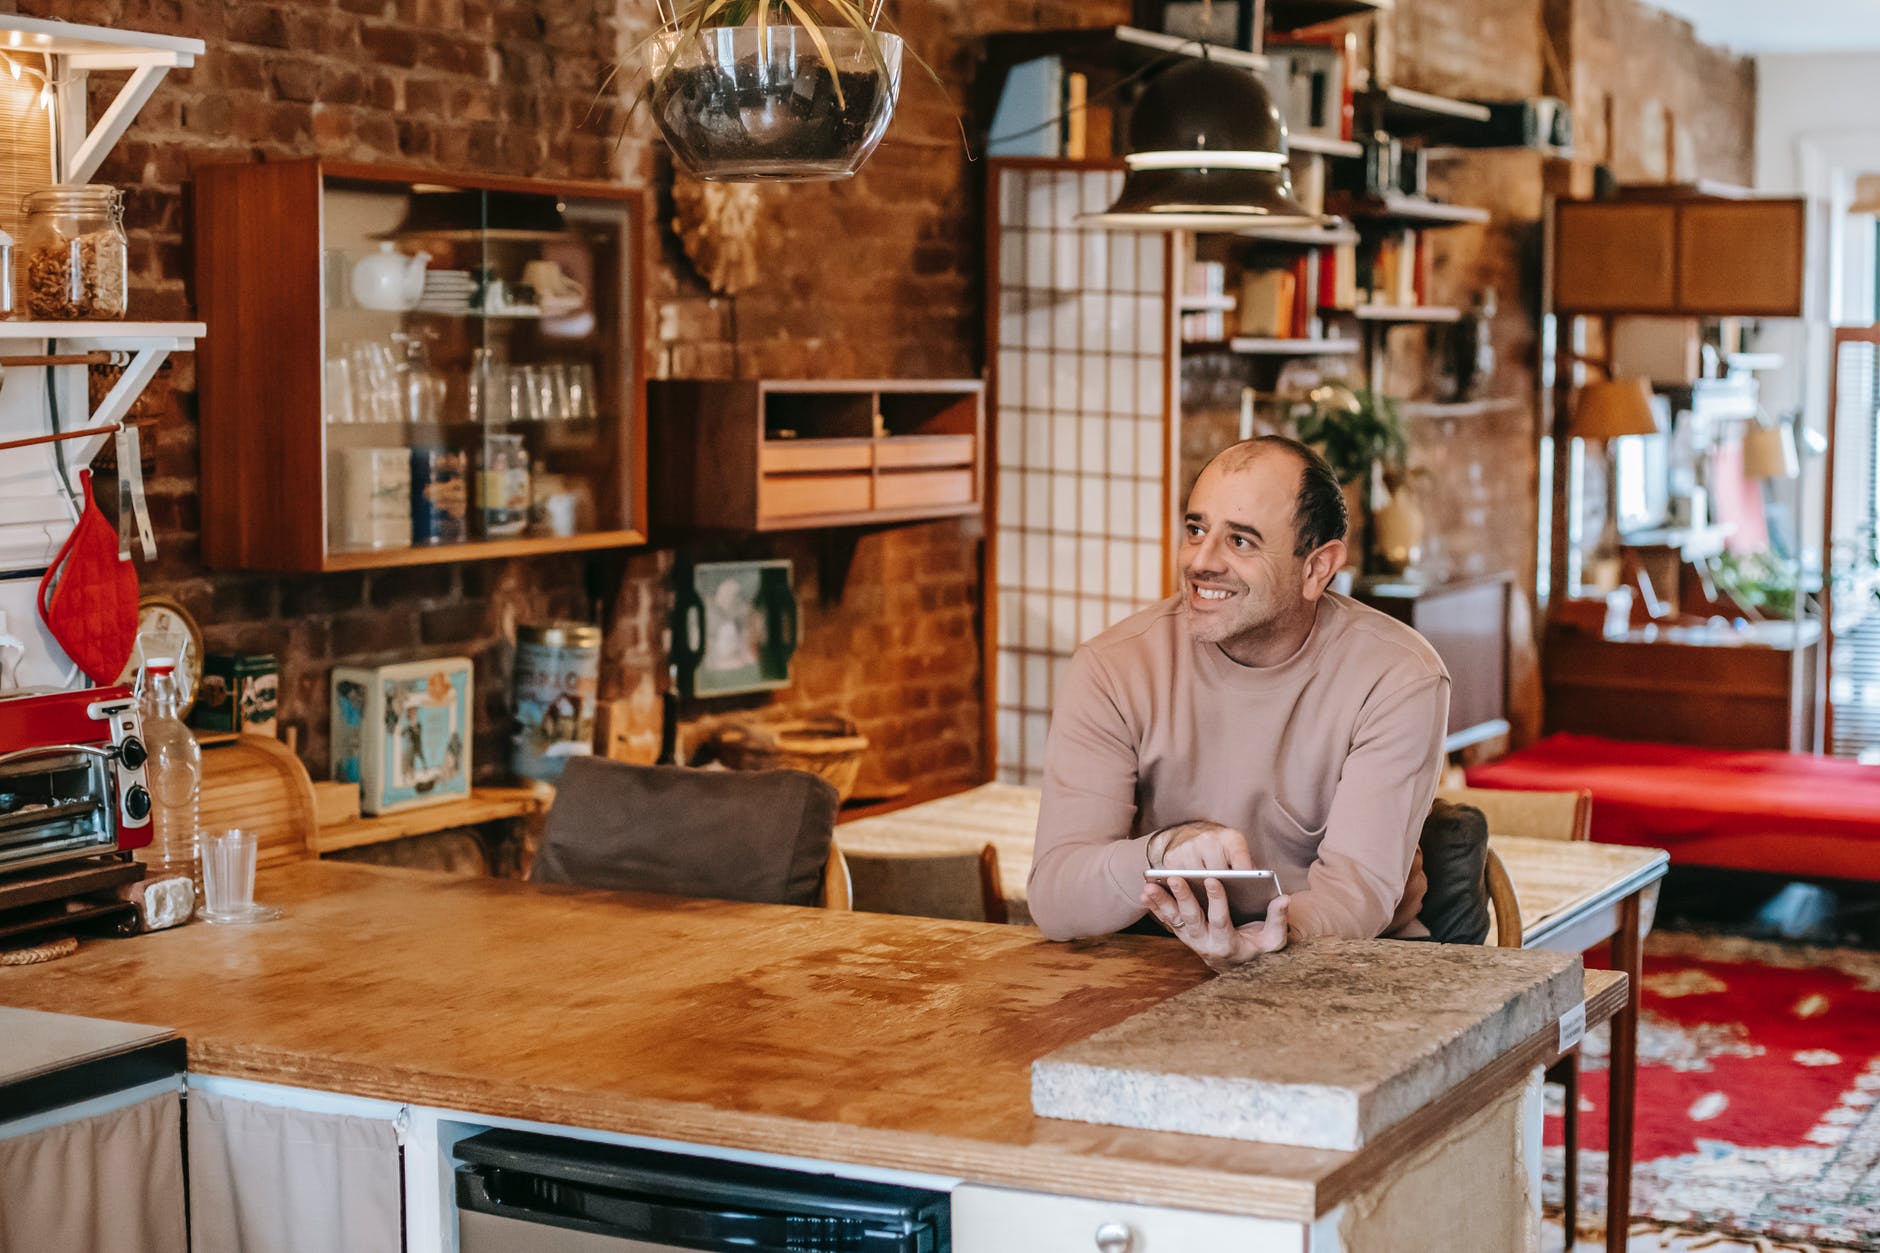 A man smiling while seated by the kitchen counter. | Source: Pexels